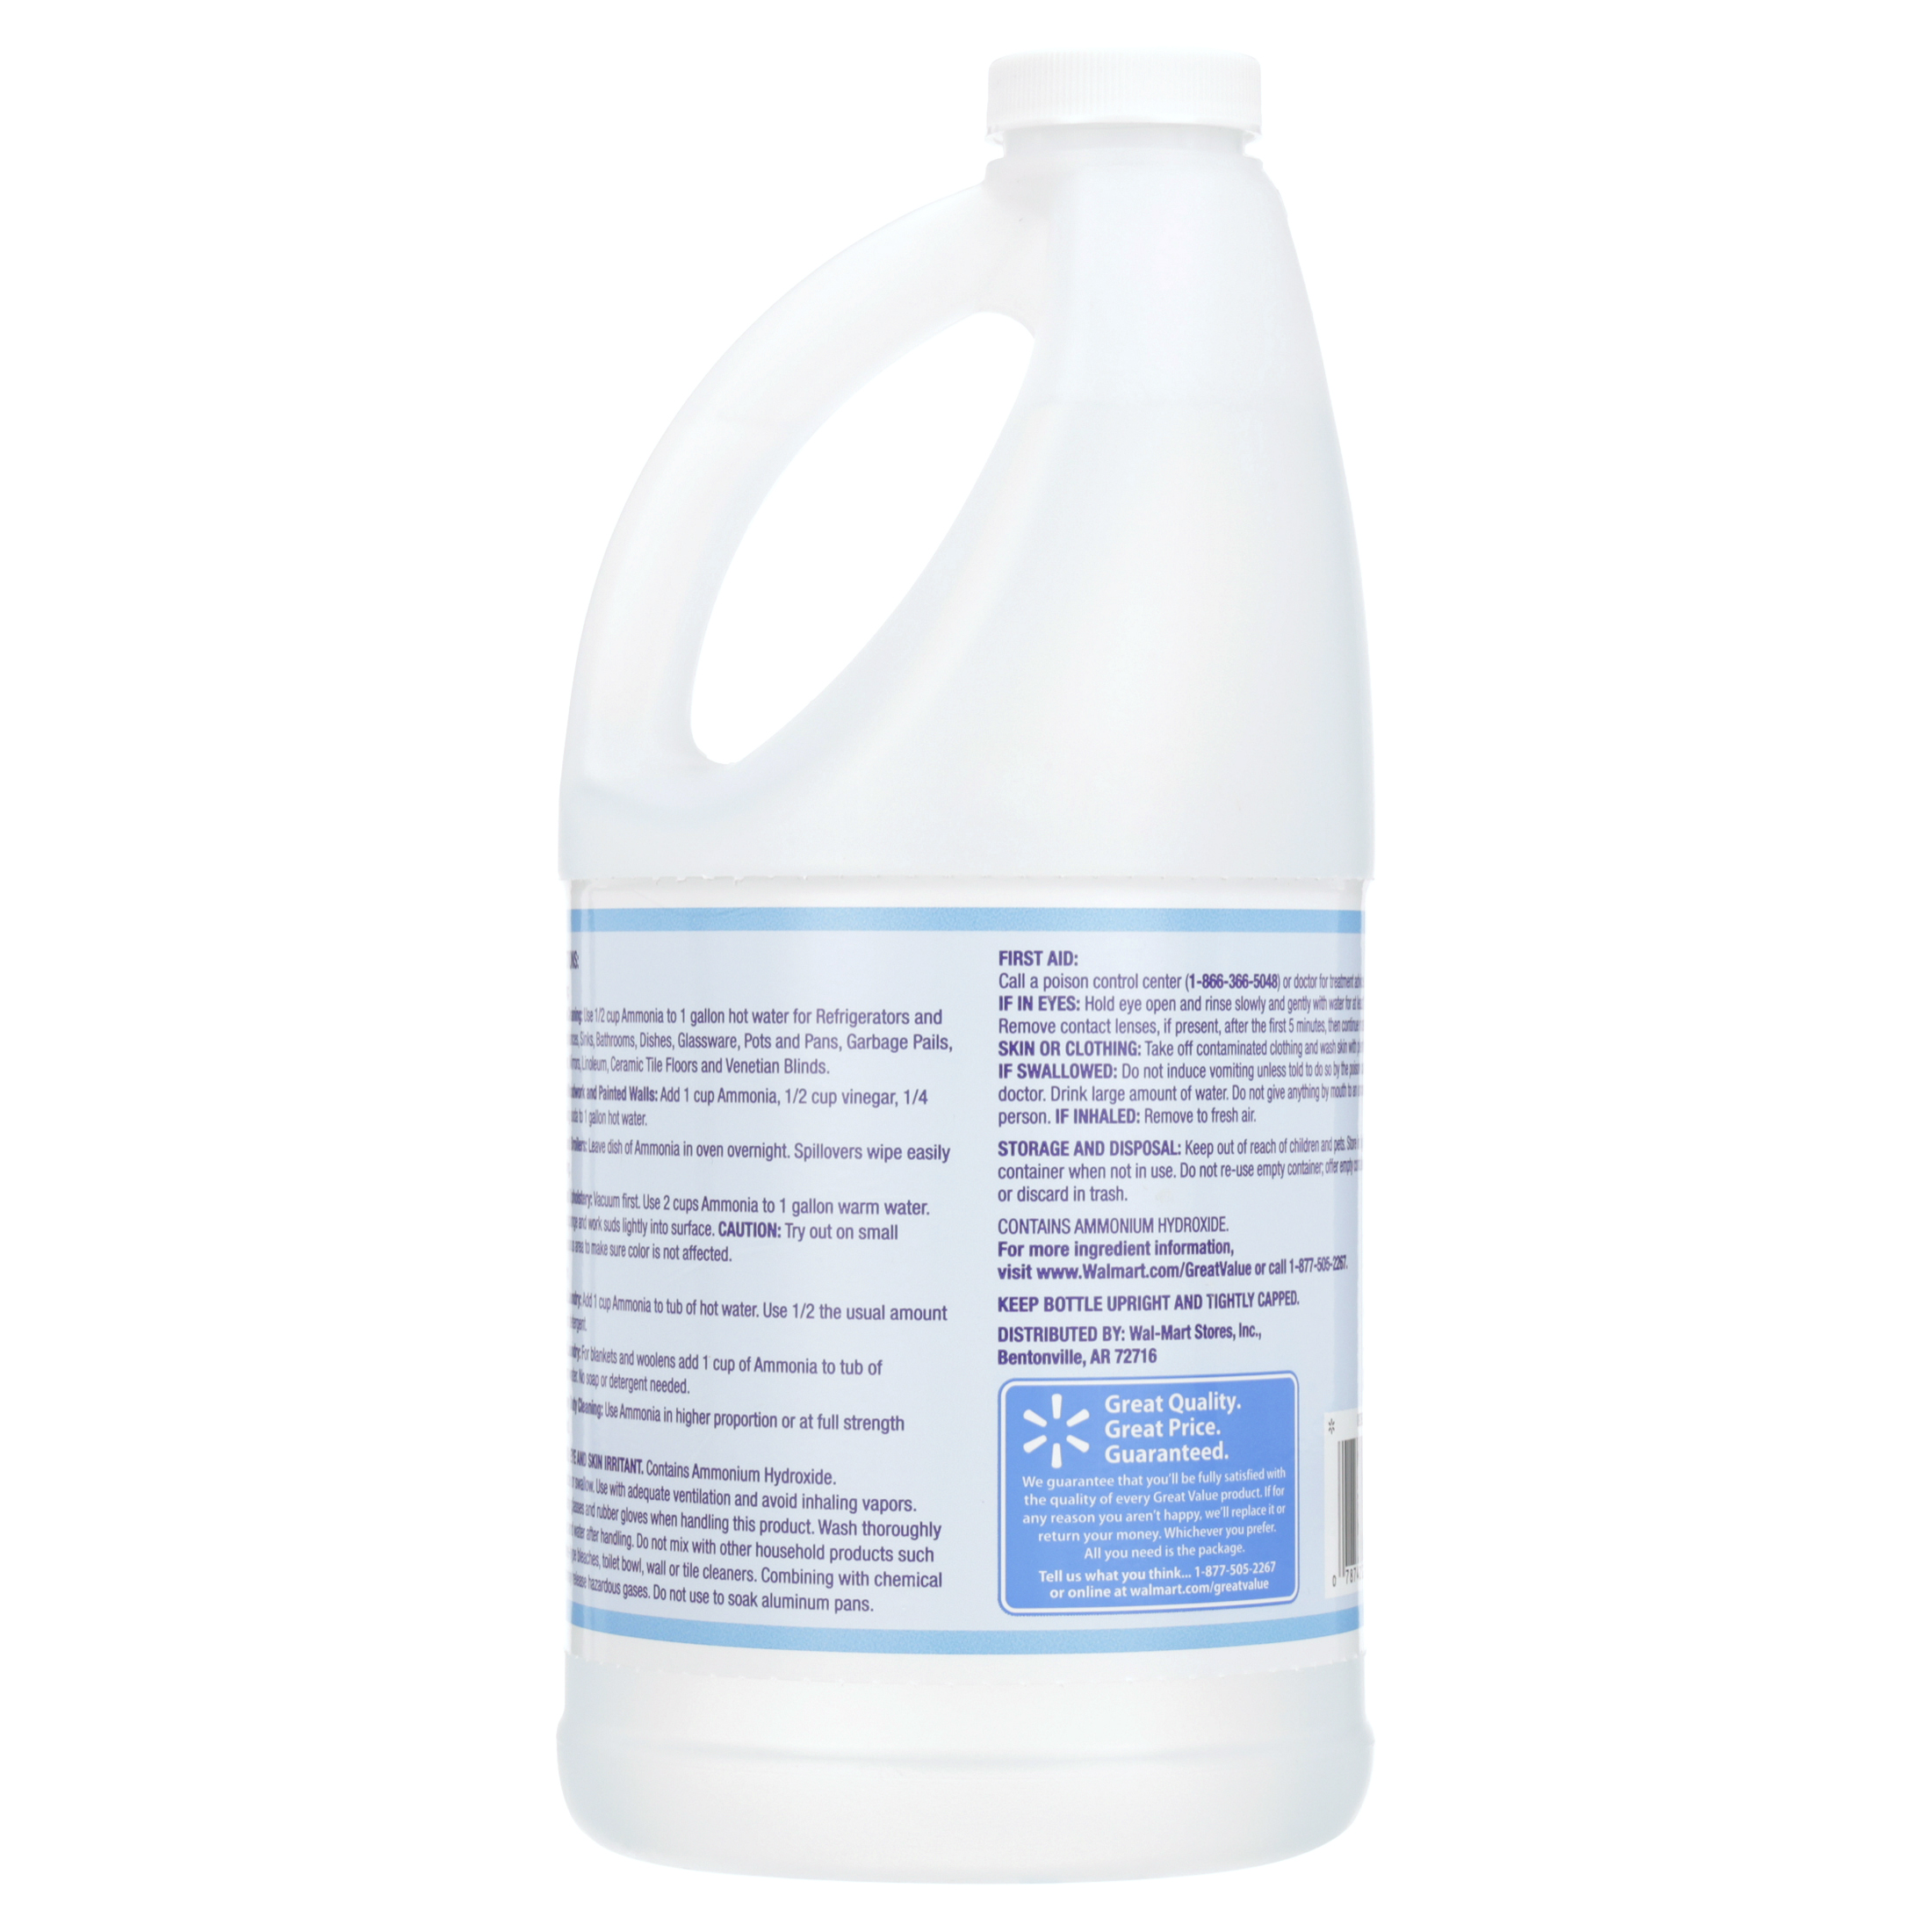 Great Value Clear Ammonia All-Purpose Cleaners, 64 fl oz - image 4 of 7